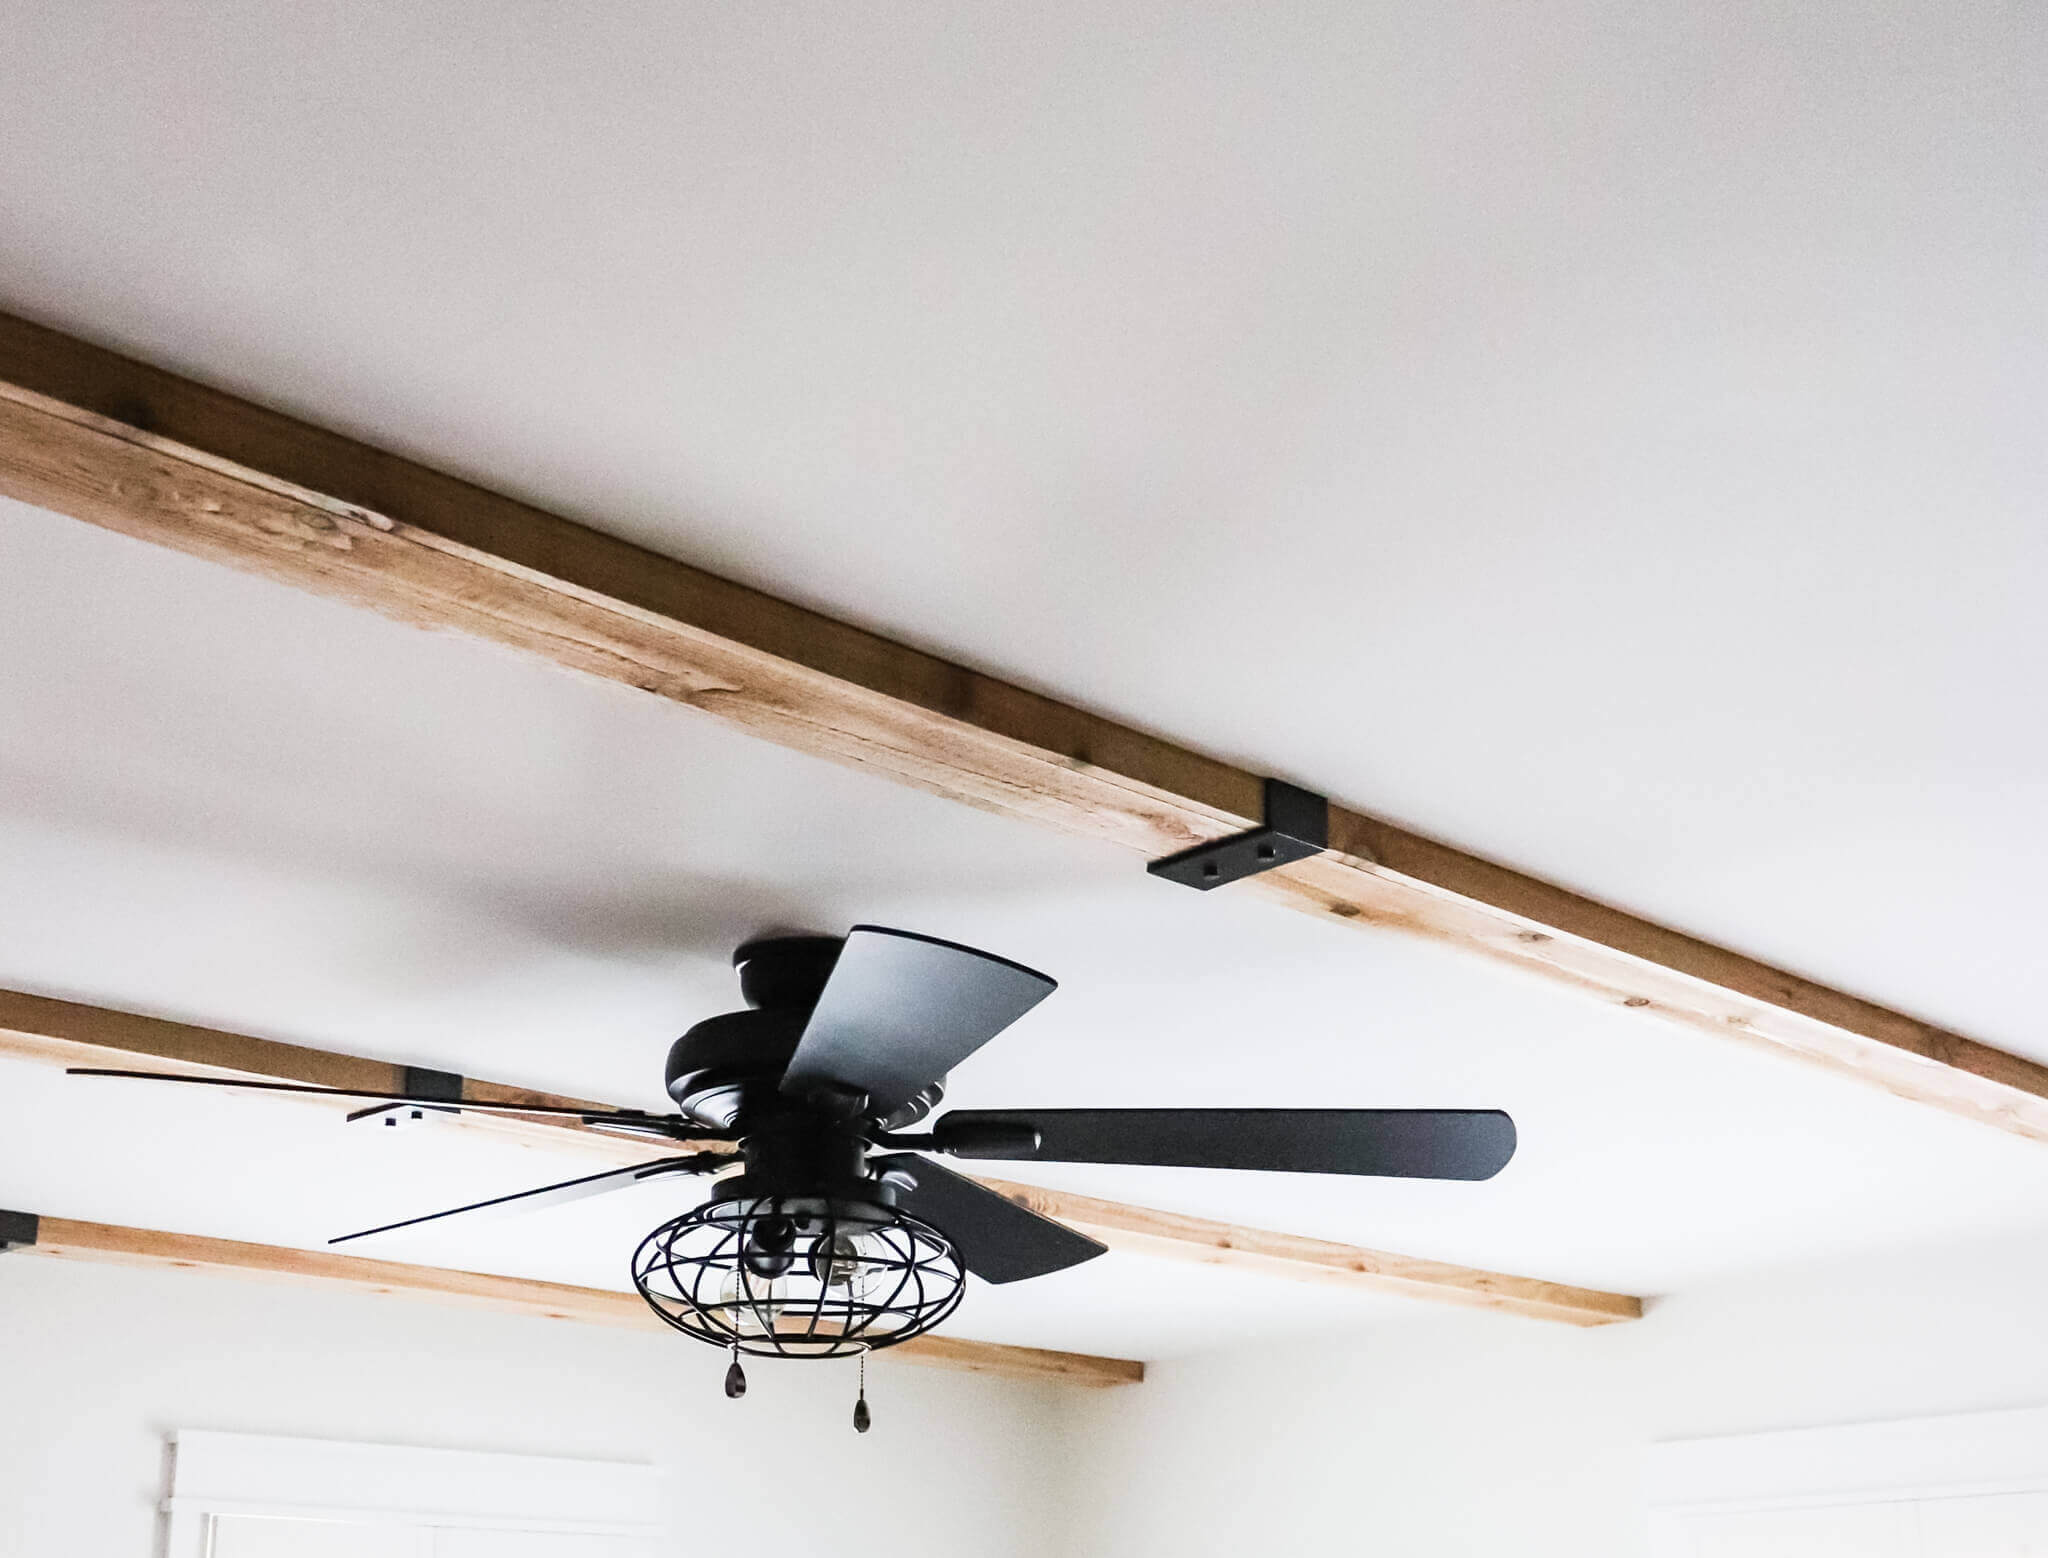 wooden ceiling beams with a black ceiling fan